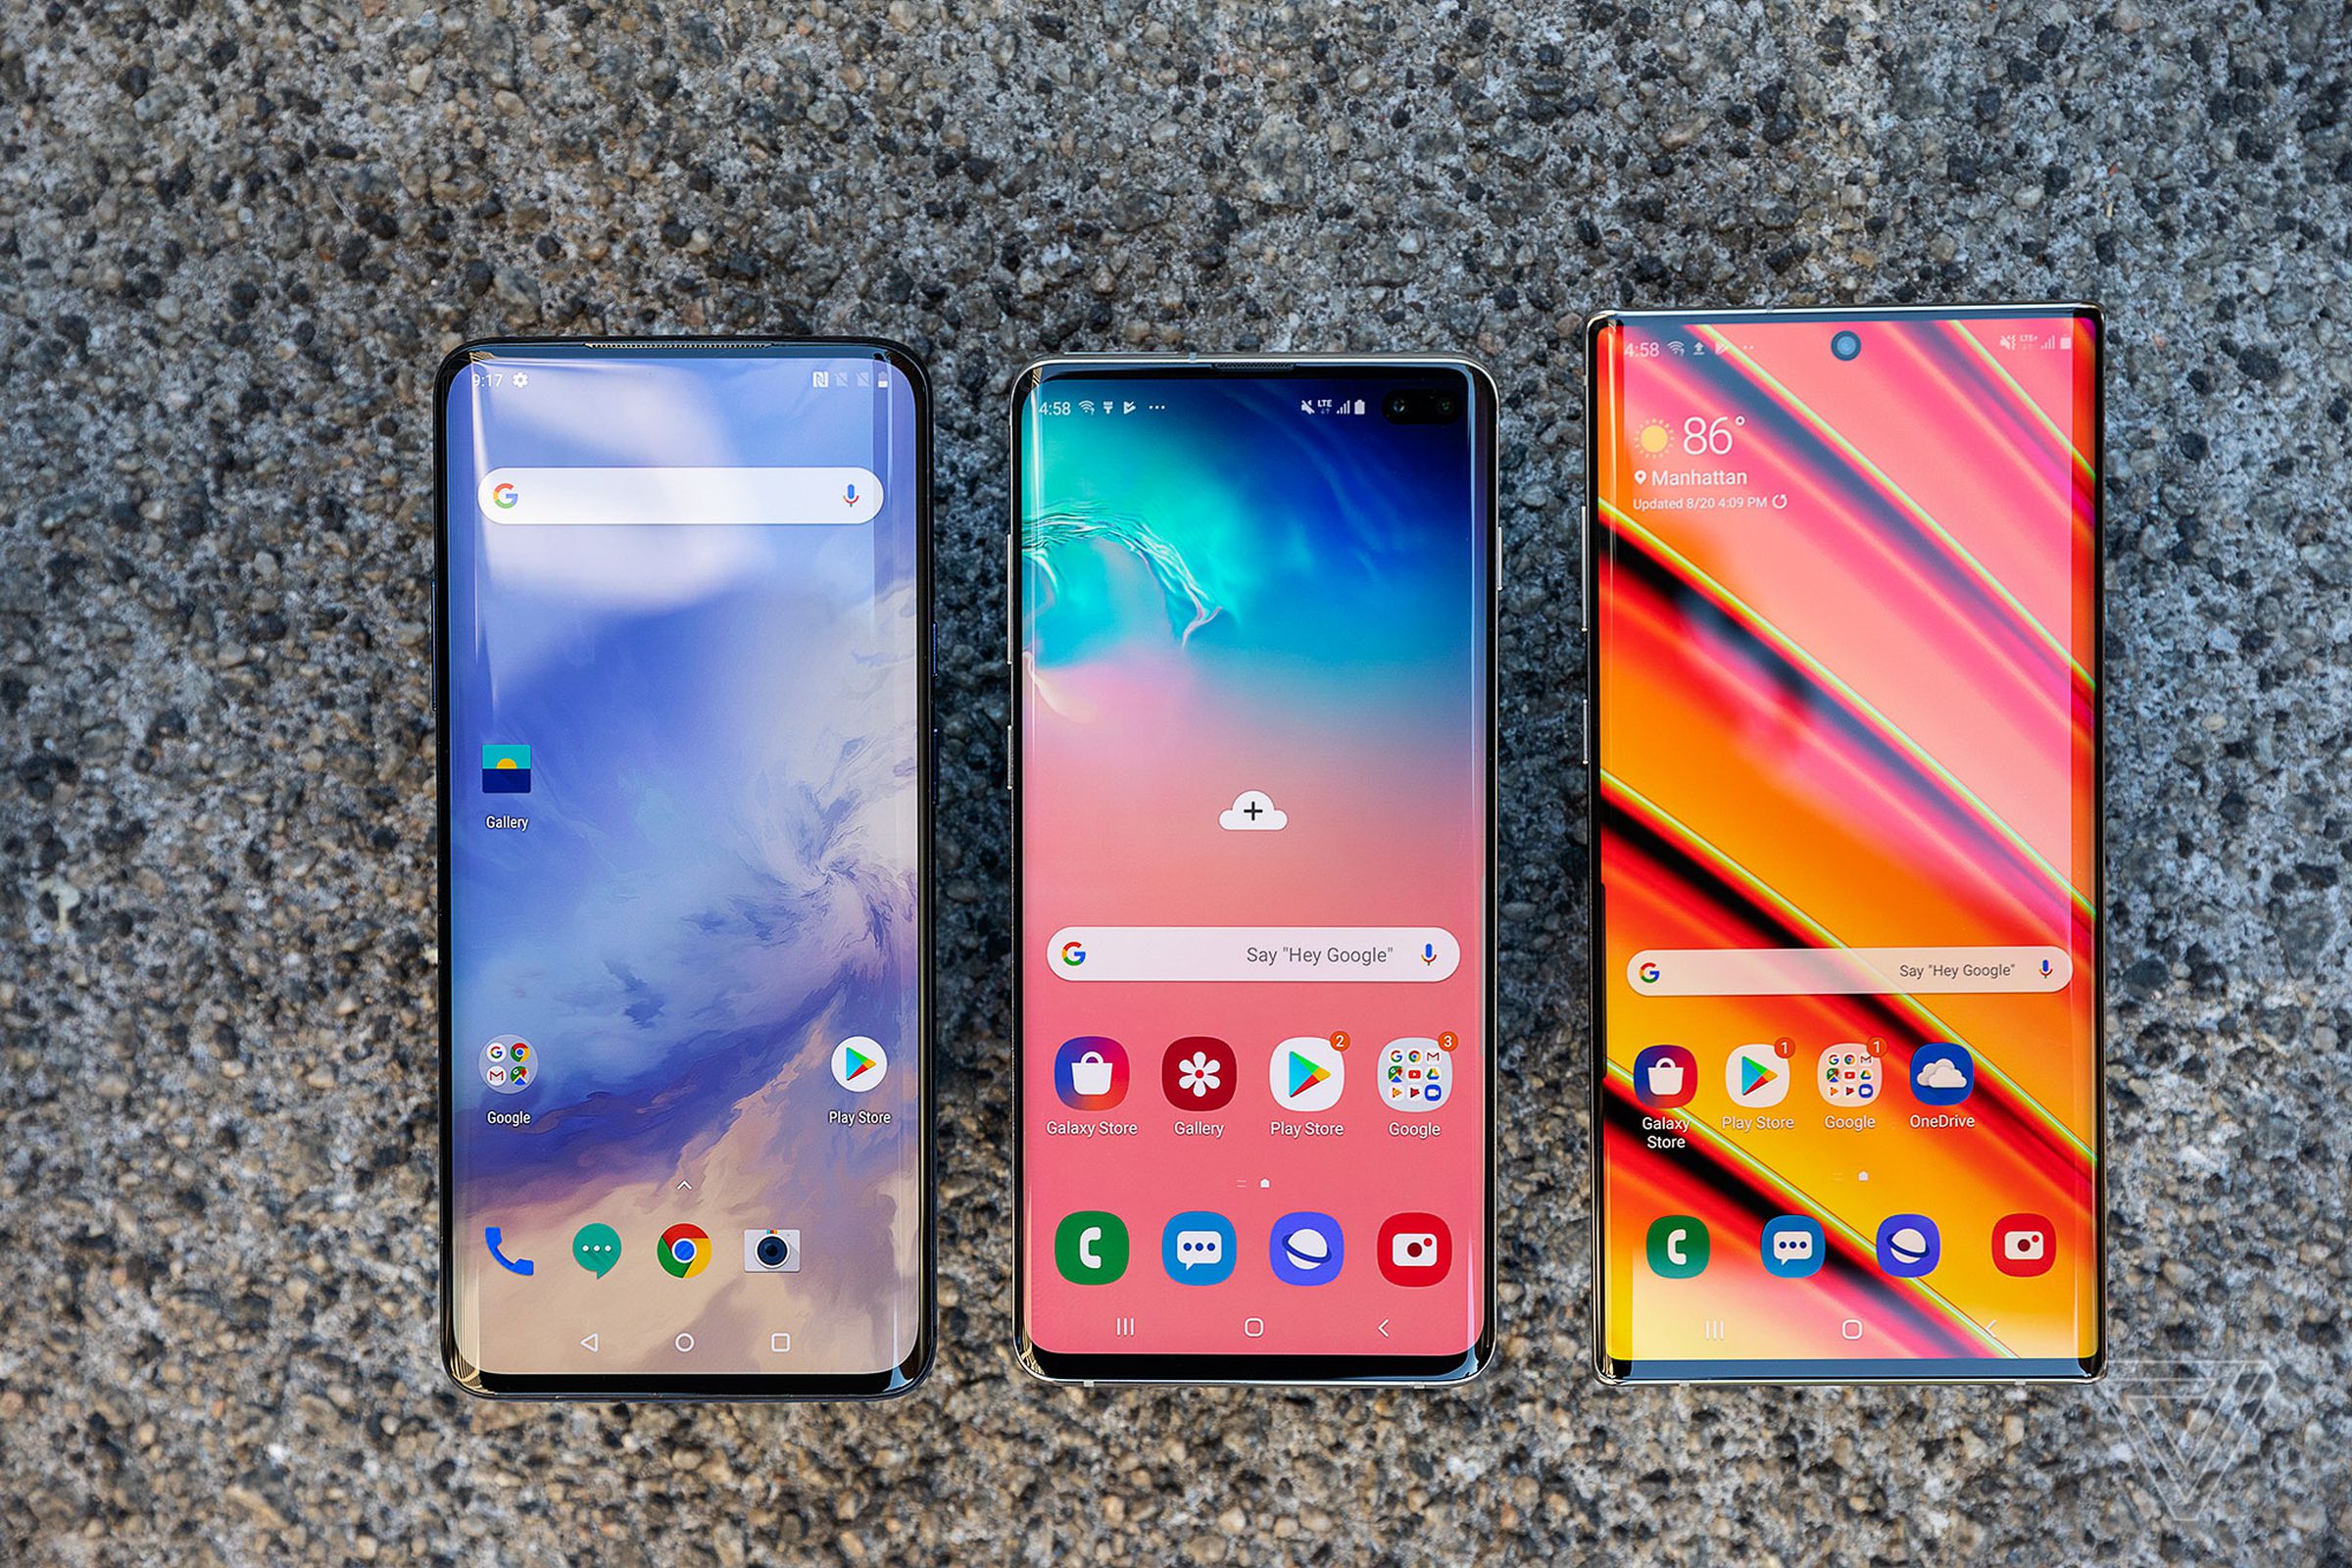 Left to right: OnePlus 7 Pro, Galaxy S10 Plus, Galaxy Note 10 Plus